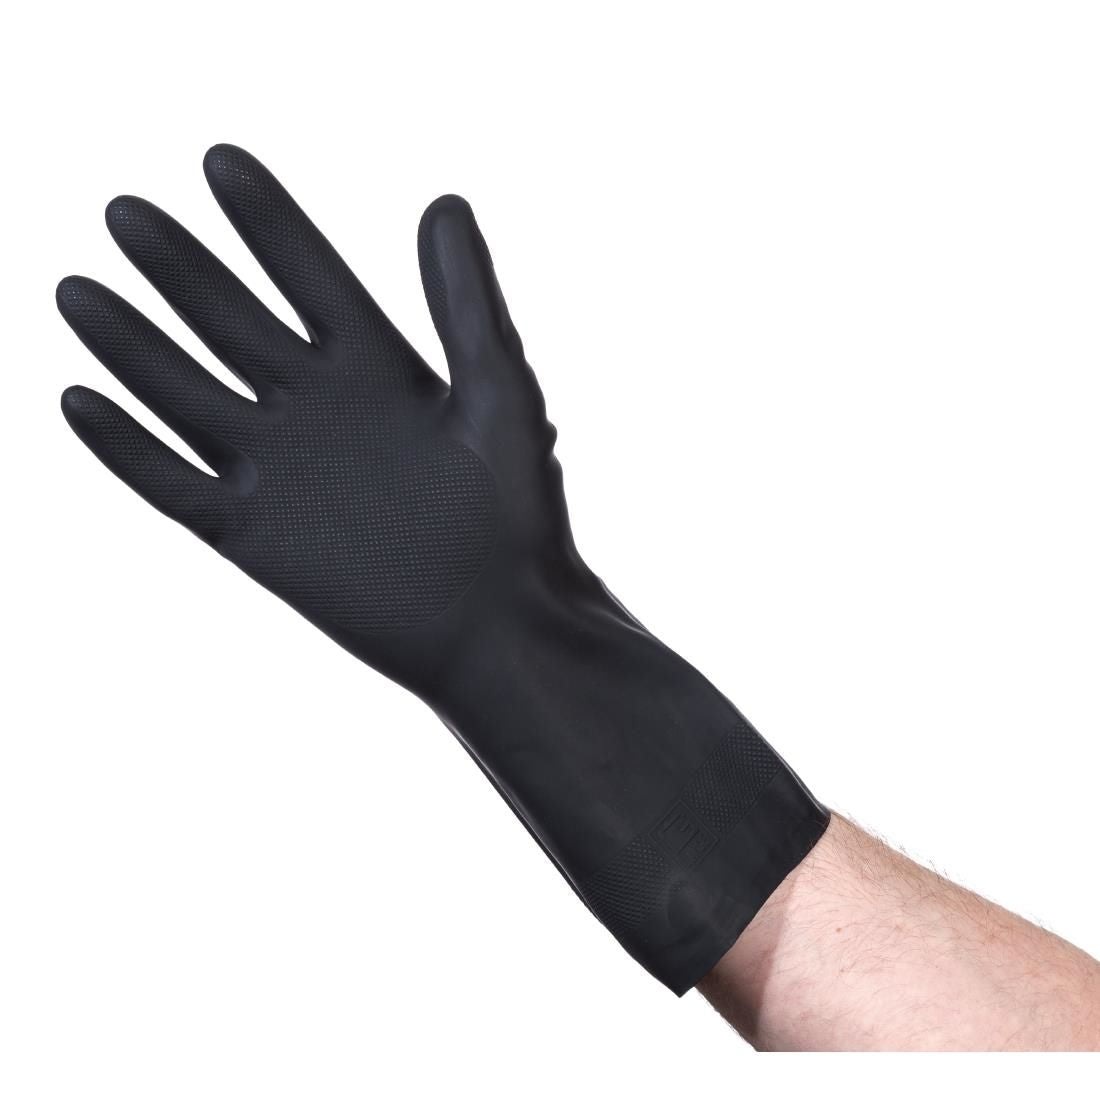 MAPA Cleaning and Maintenance Glove S - F954-S Rubber Gloves Mapa   